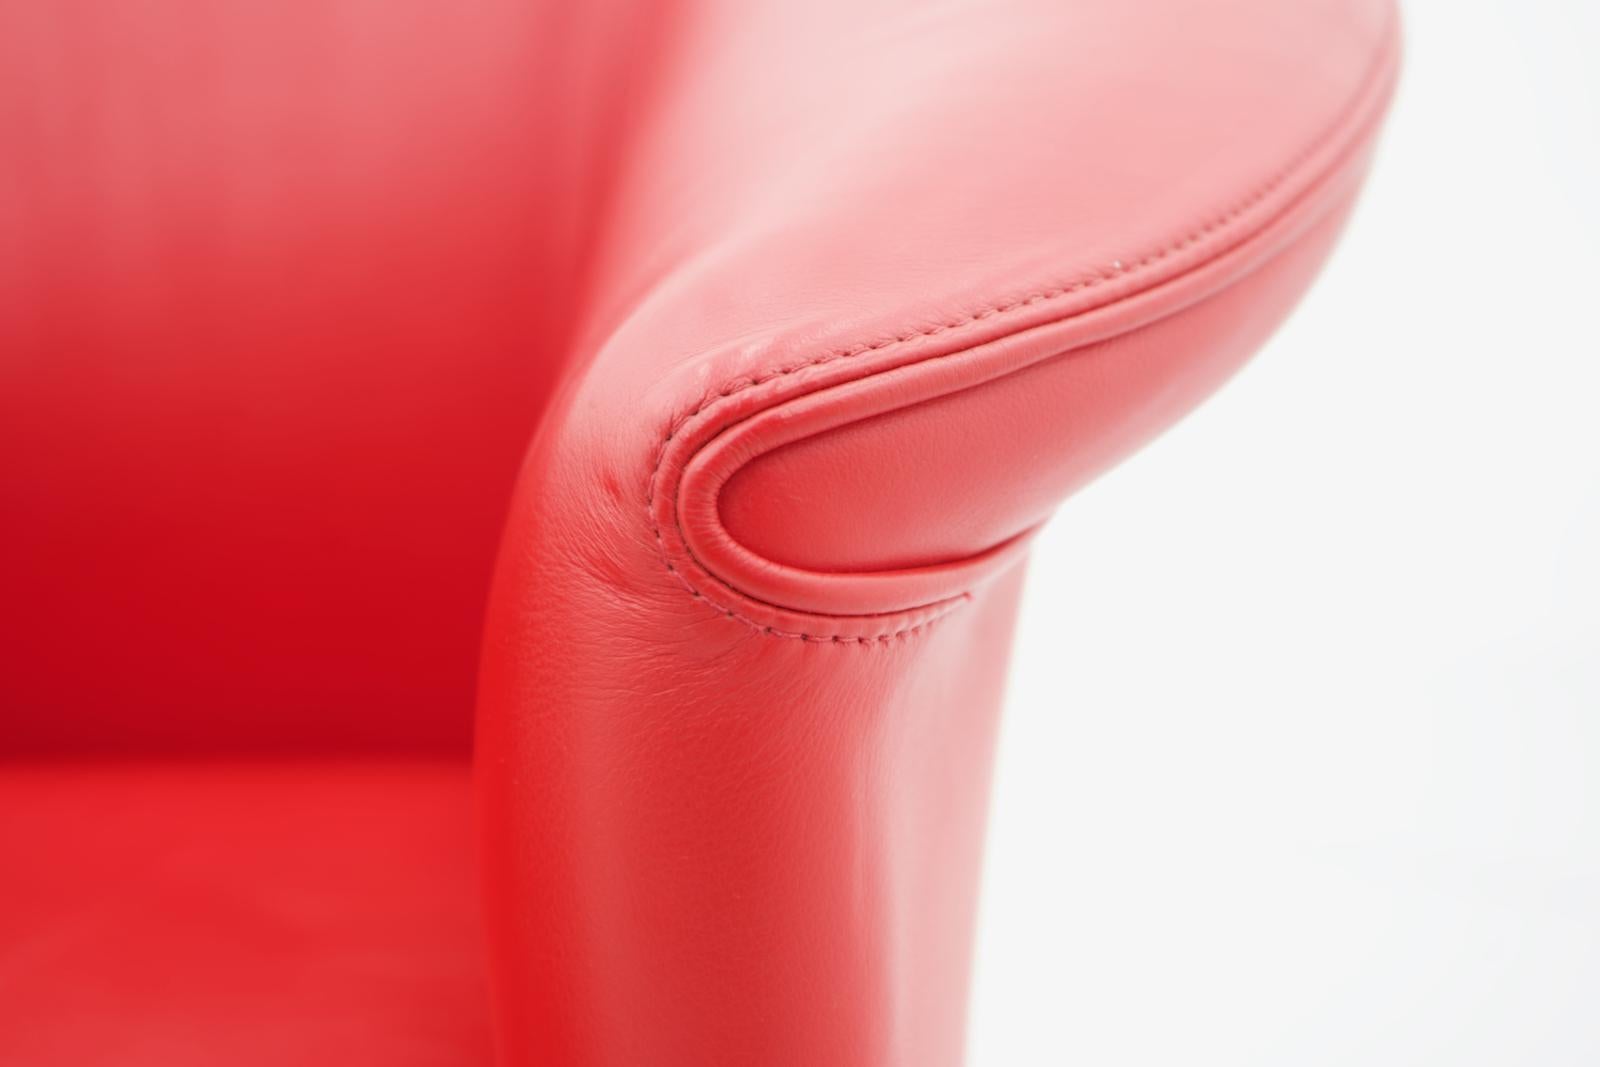 Red leather Lounge chair “Aura“ by Paolo Piva for Wittmann, Austria 1983.
The condition is very good.